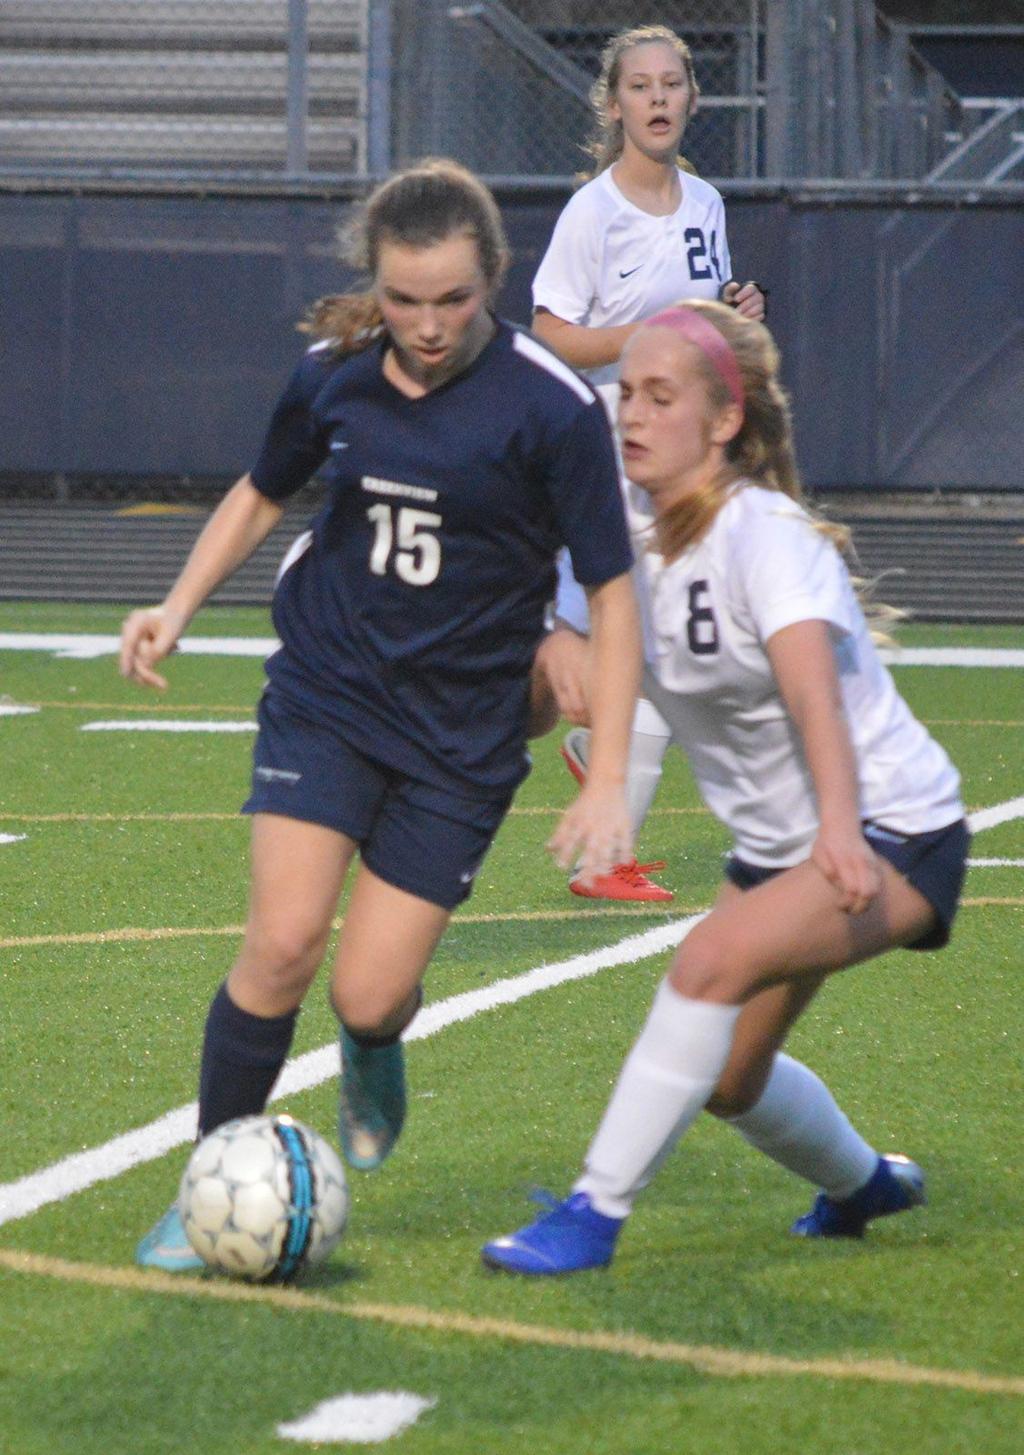 Girls Varsity Soccer (3/1) The Lady Knights played tough against Creekview, holding them to the